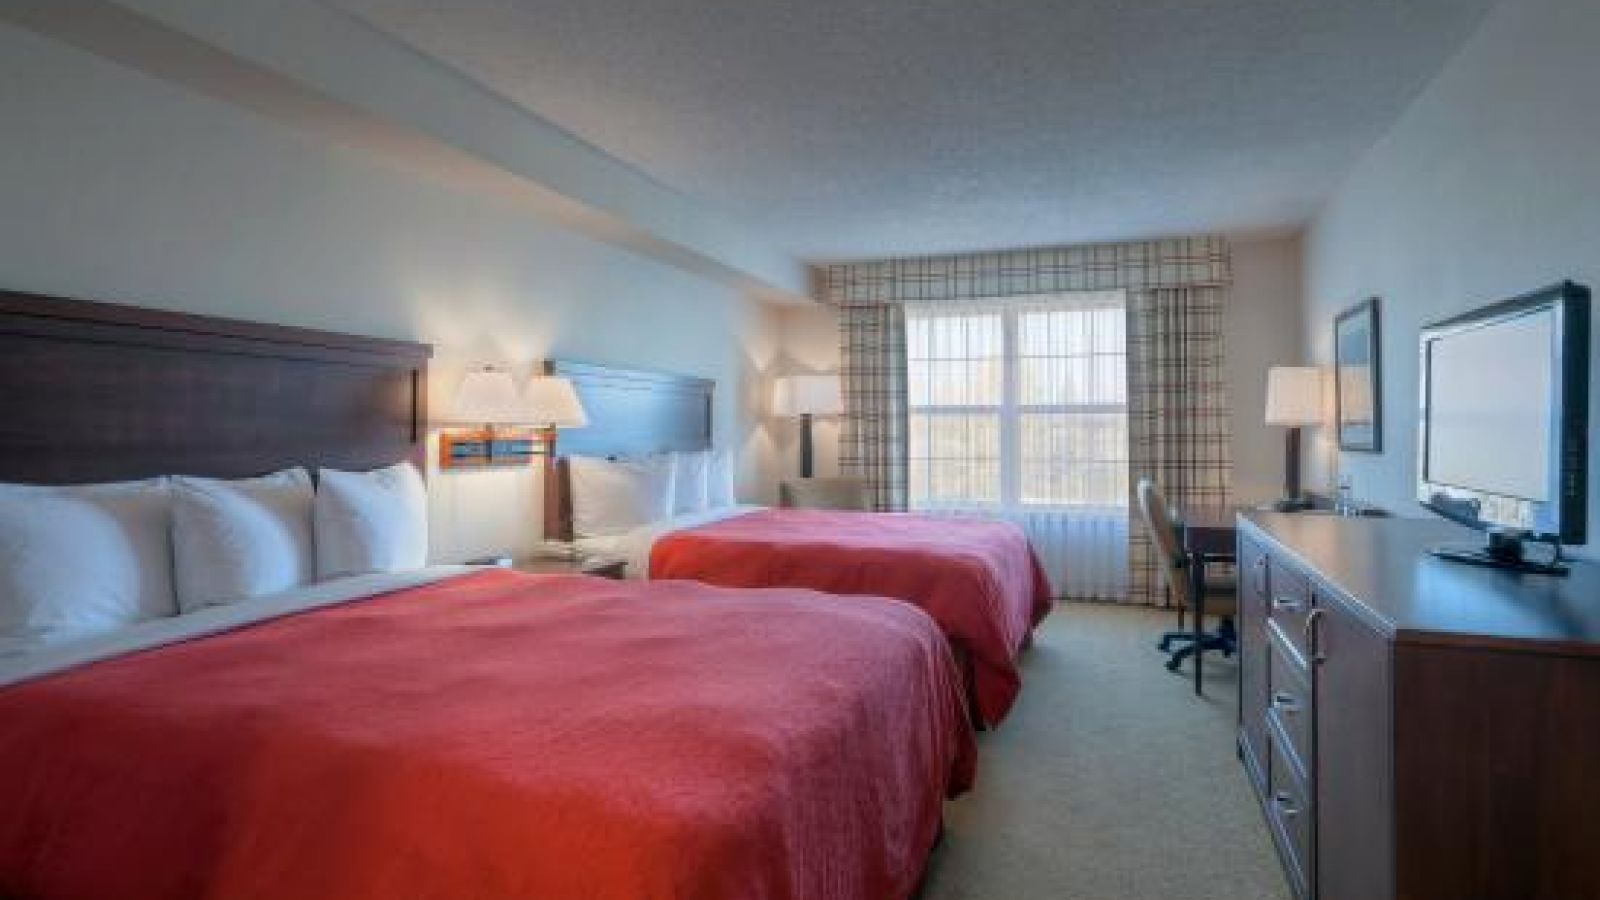 Country Inn and Suites by Carlson Calgary Airport